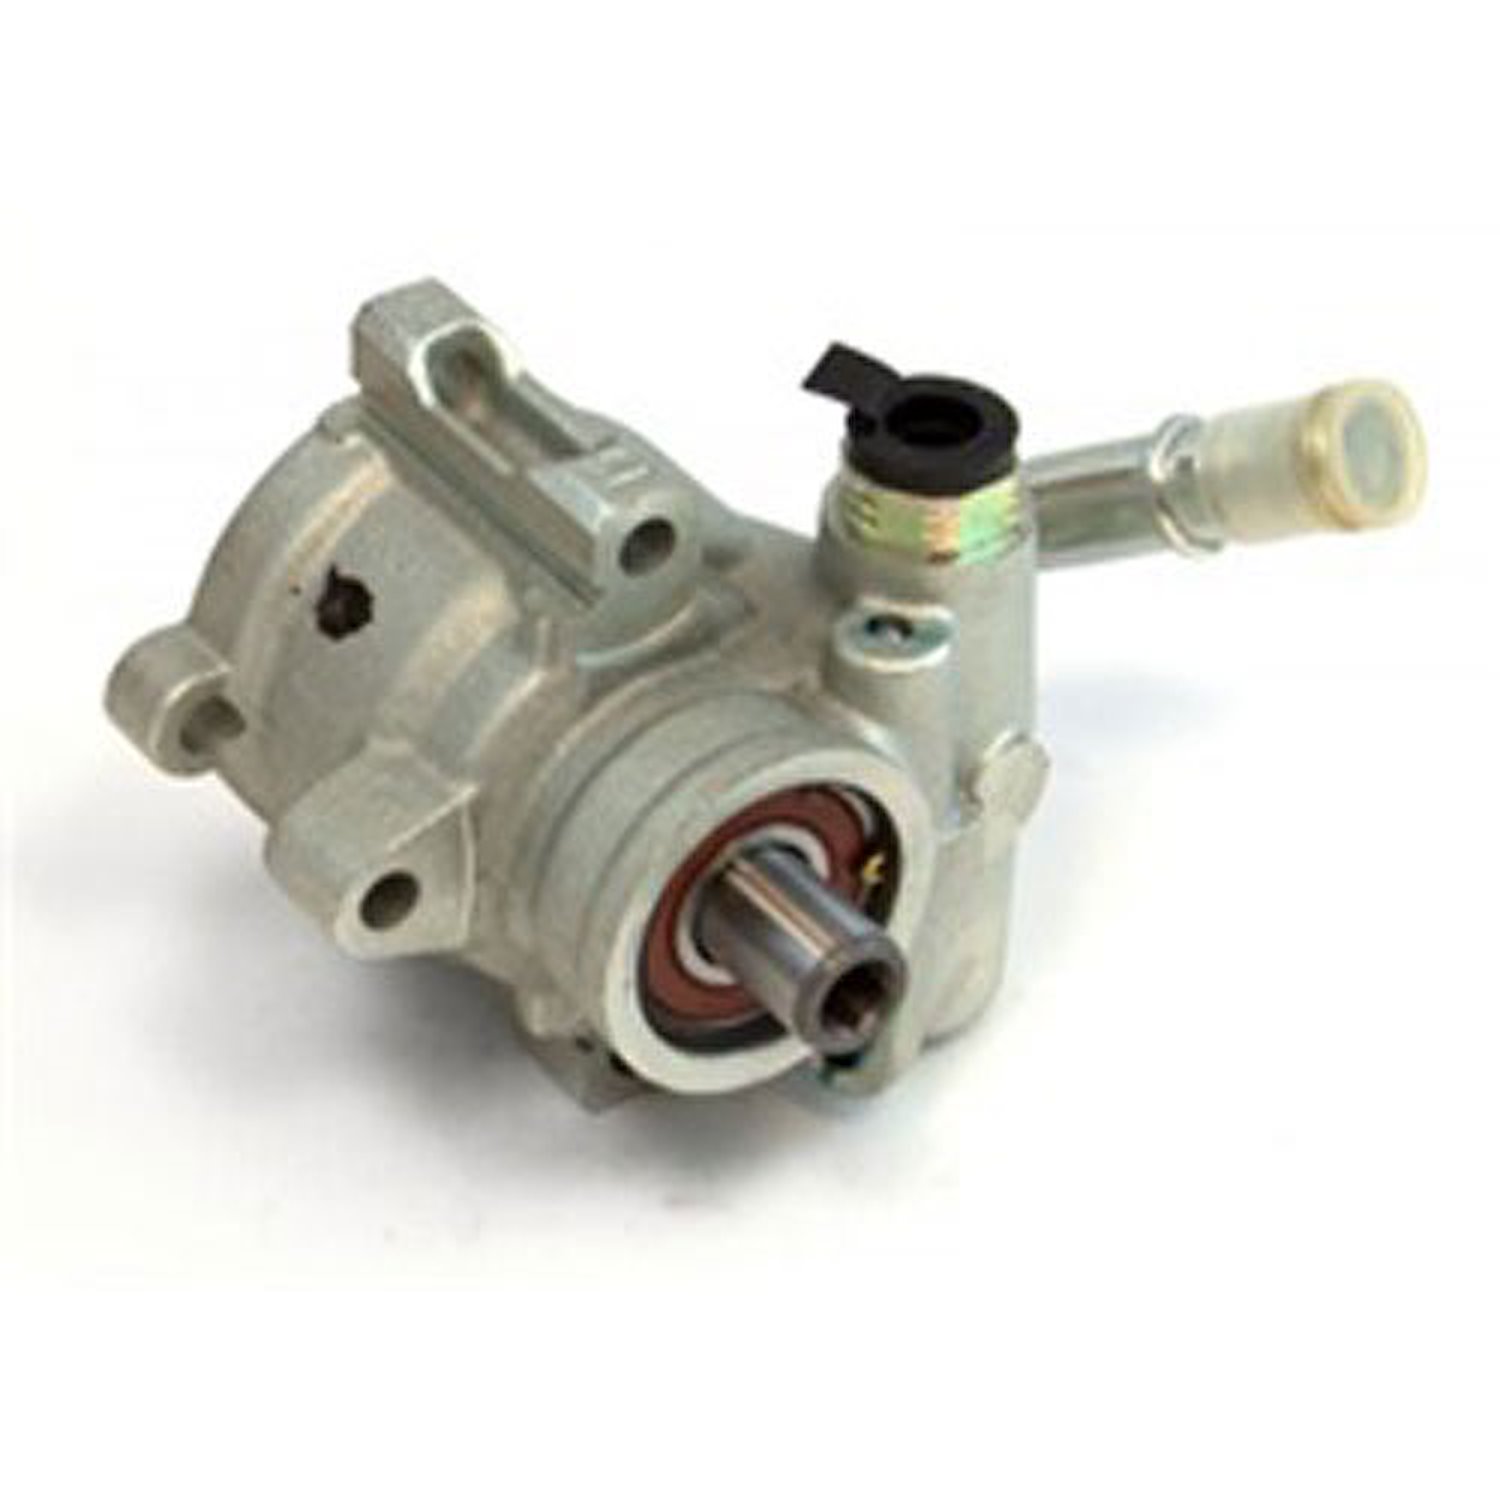 This power steering pump from Omix-ADA fits 03-06 Jeep Wranglers with a 2.4L engine.